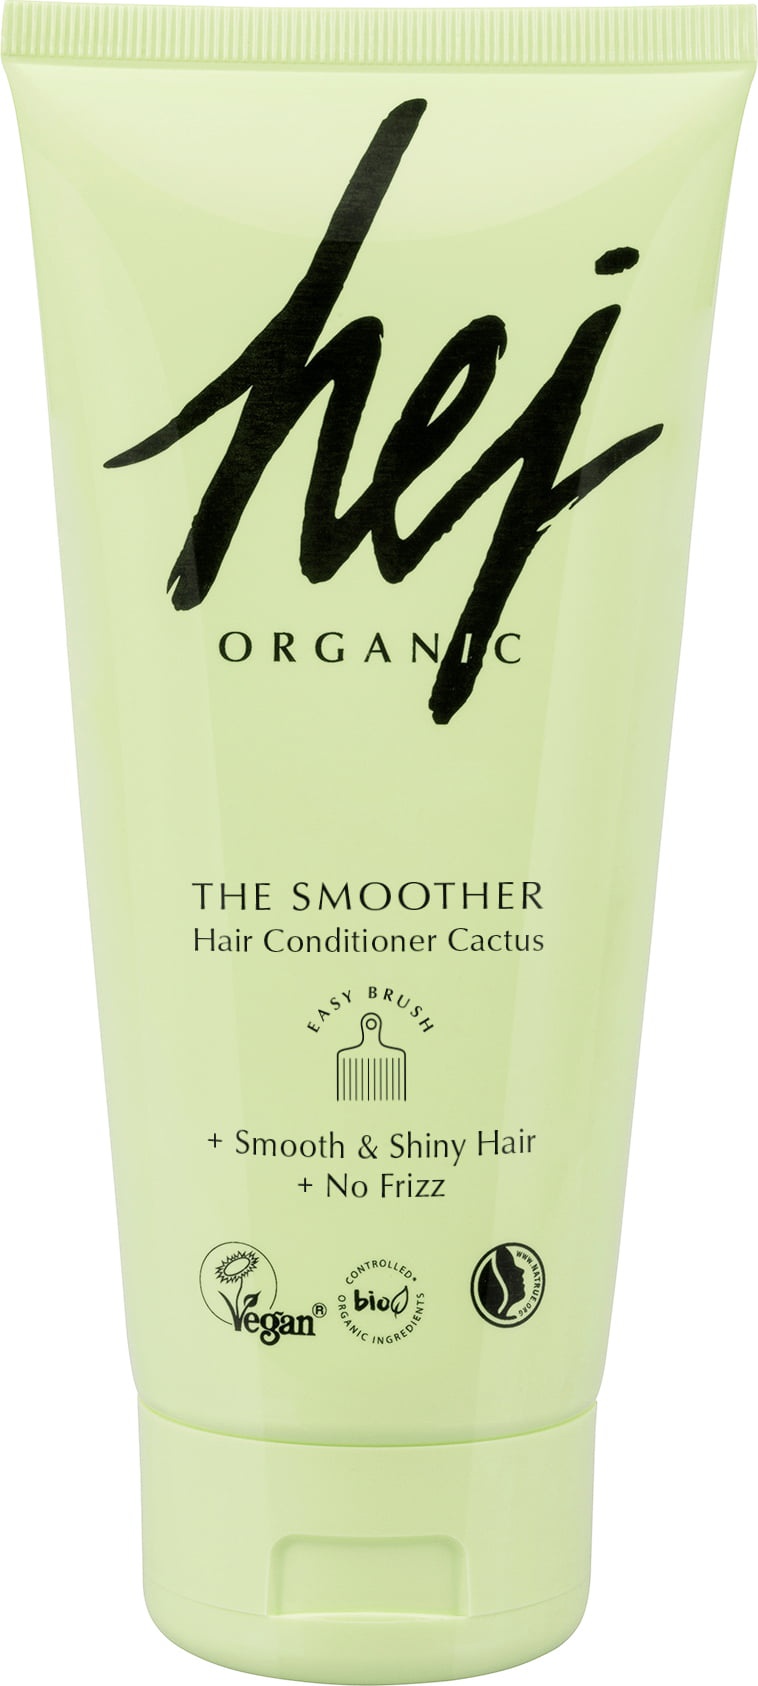 Hej organic The Smoother Hair Conditioner